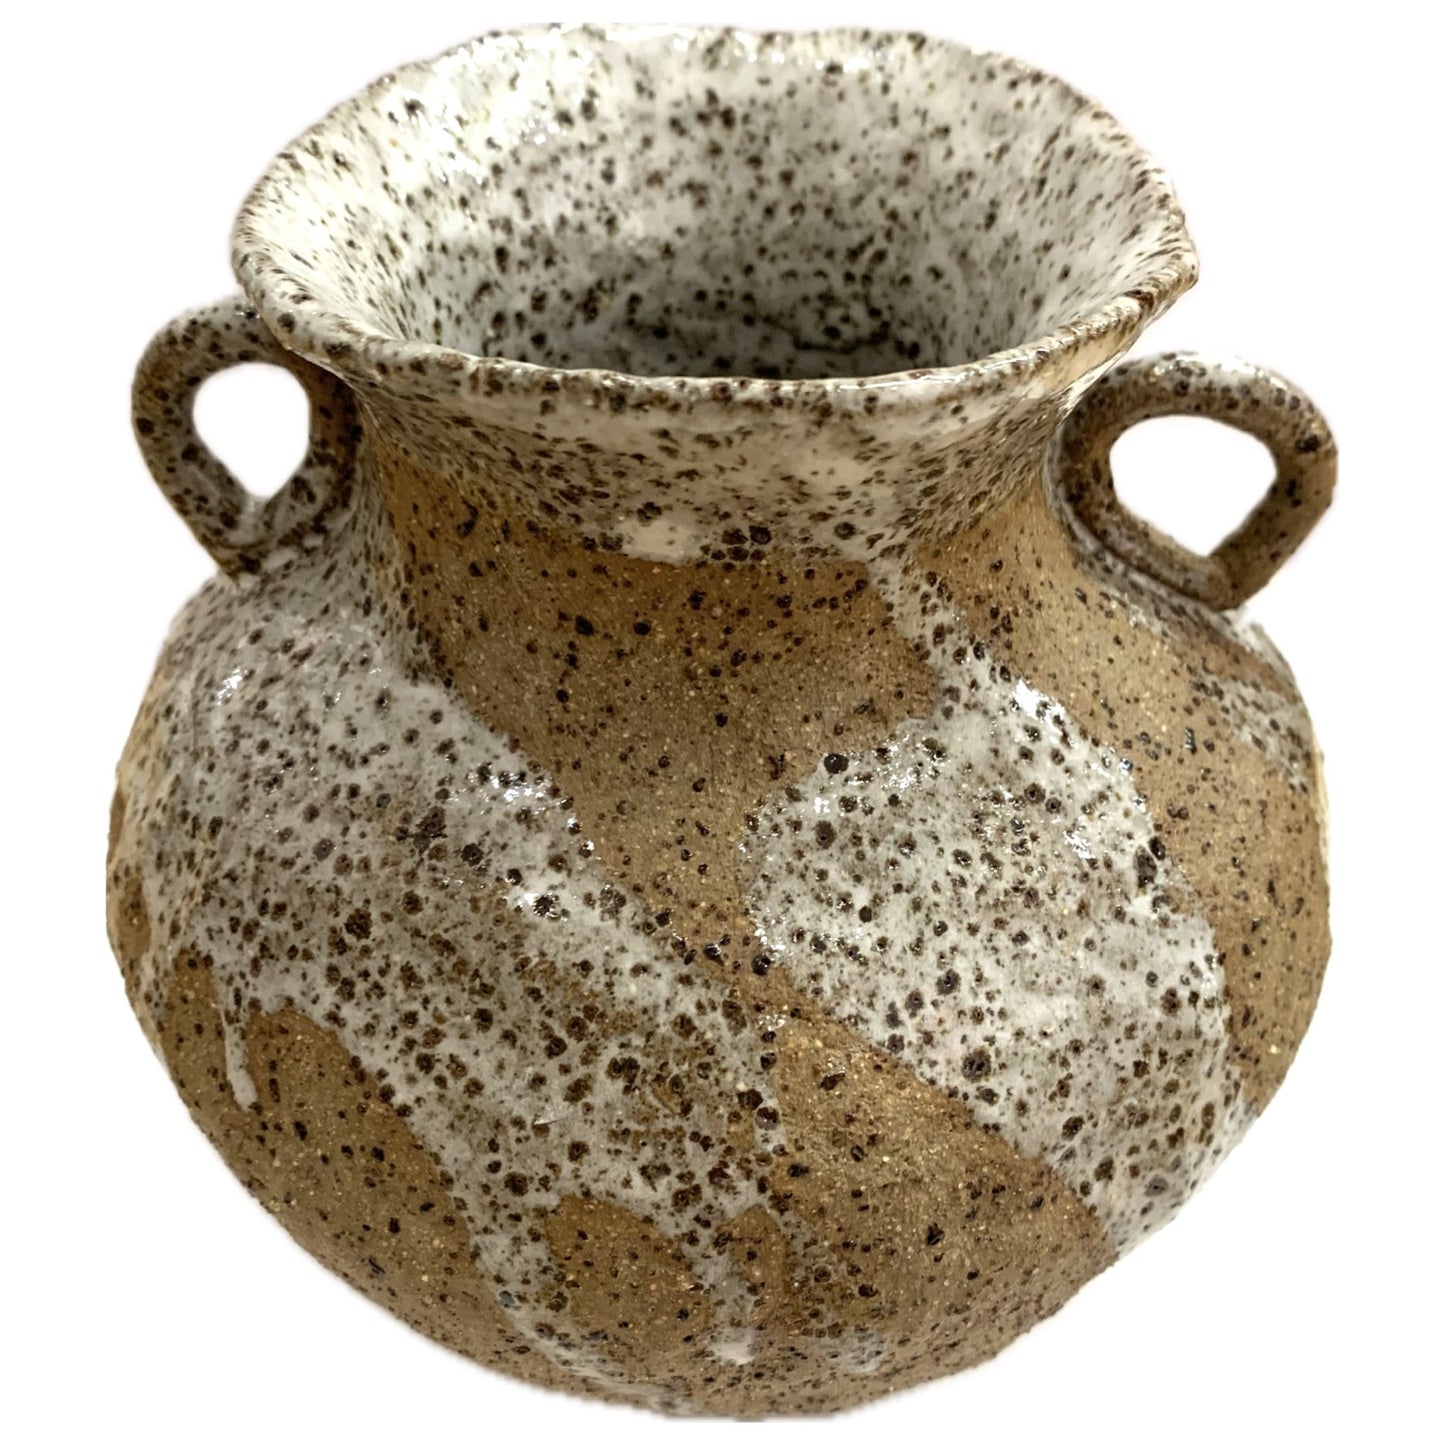 EARTH BY HAND- Urn Vases- Medium Dribbled White Glaze with Handles